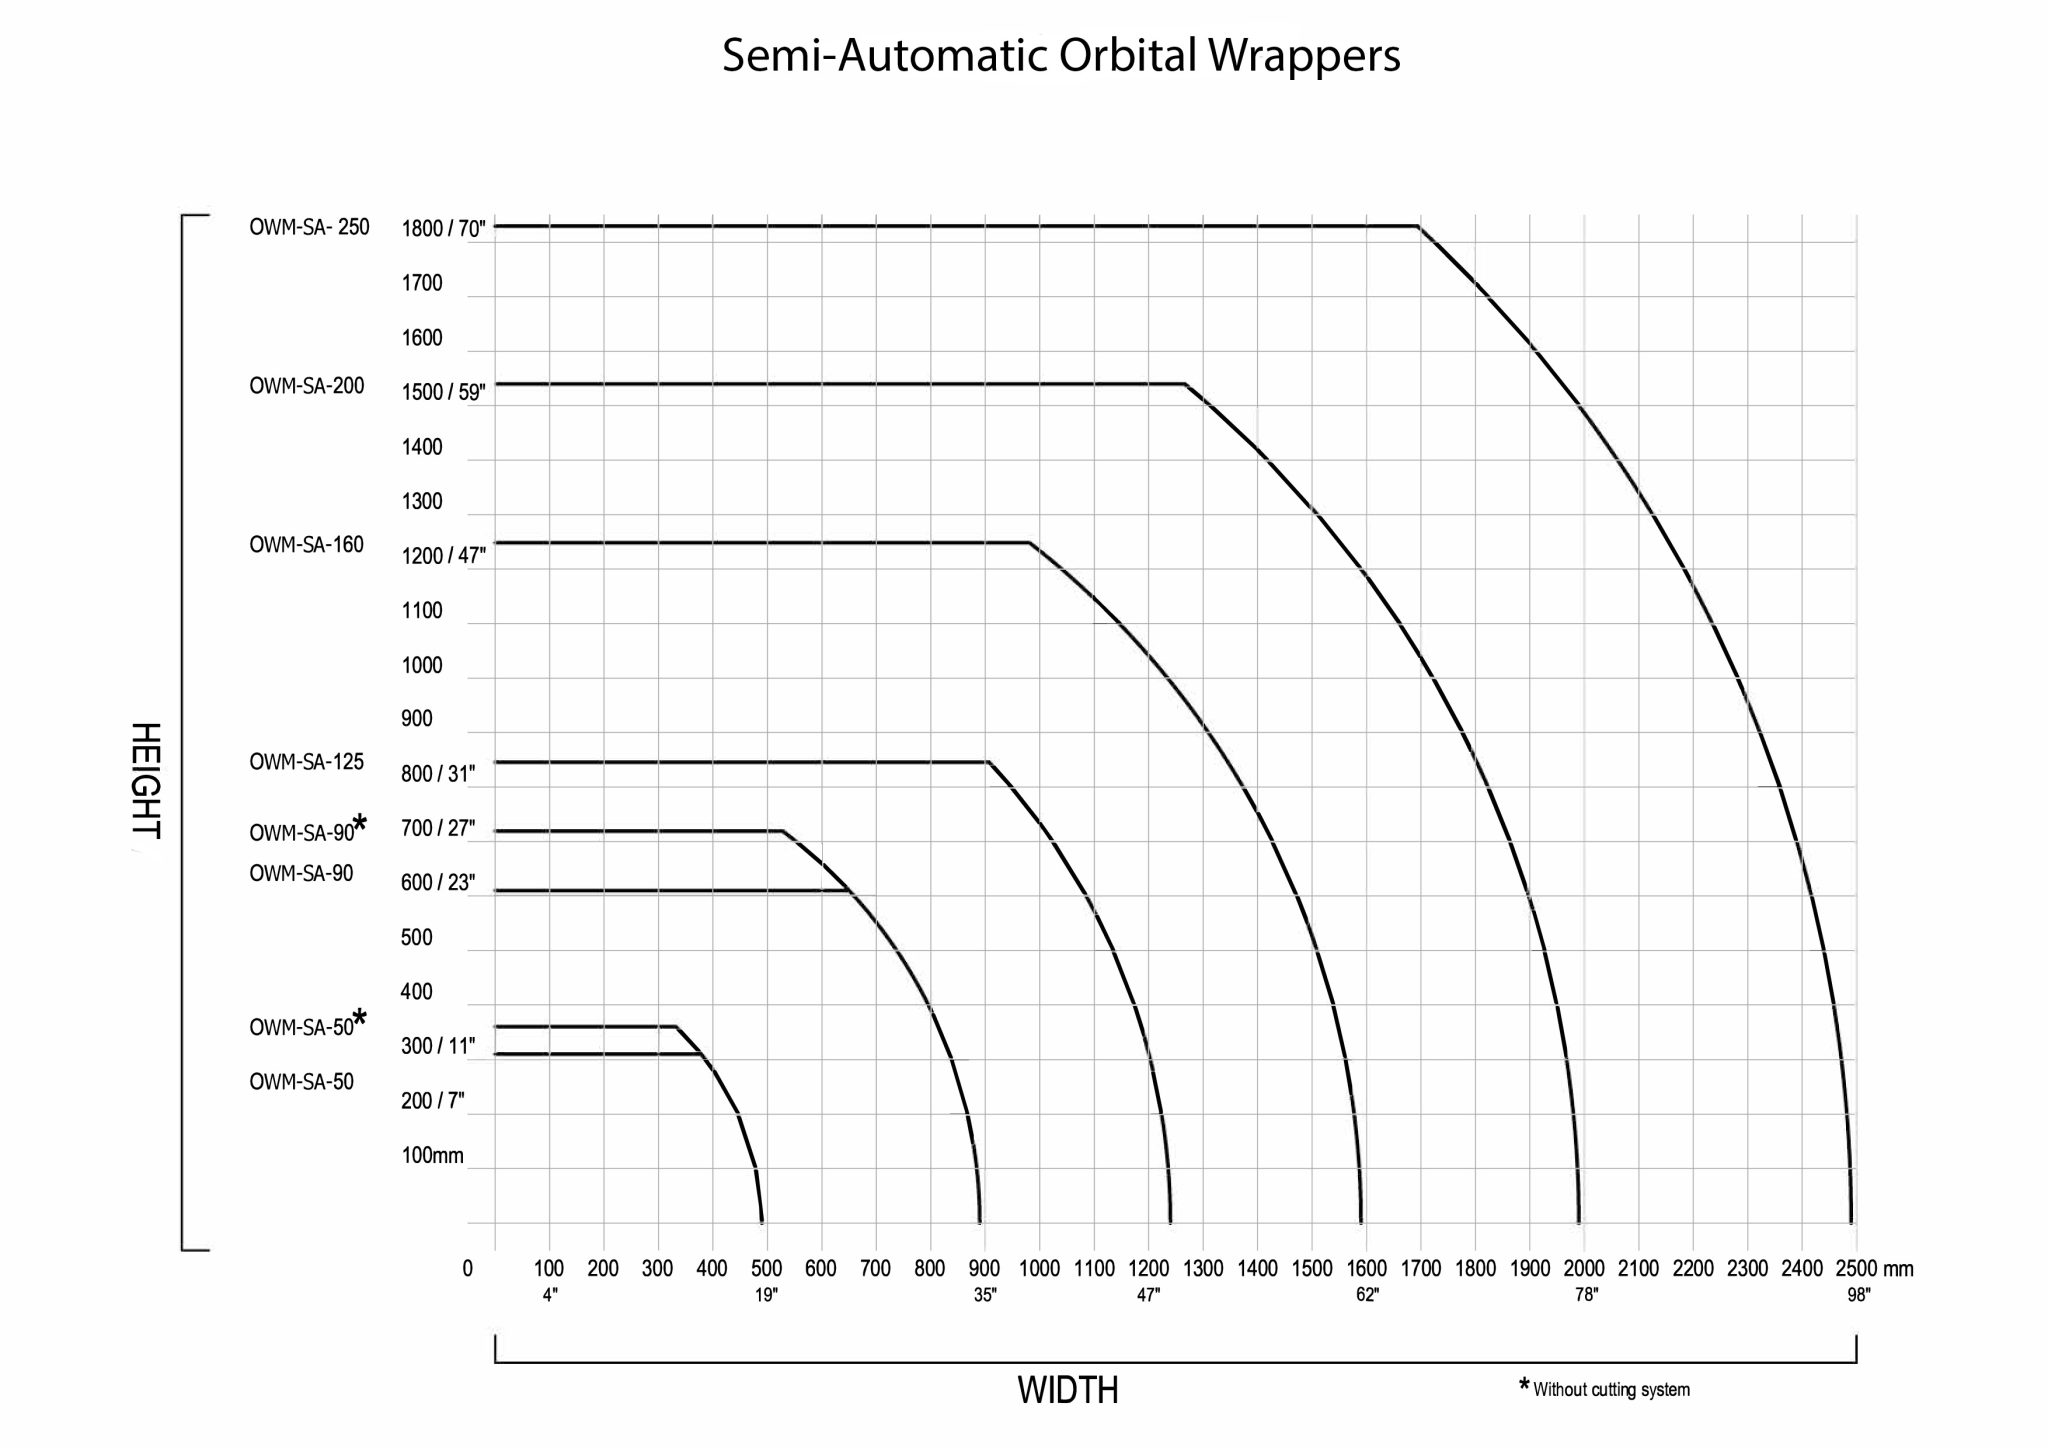 Use this chart to determine which semi-auto orbital wrapper you need for your products.